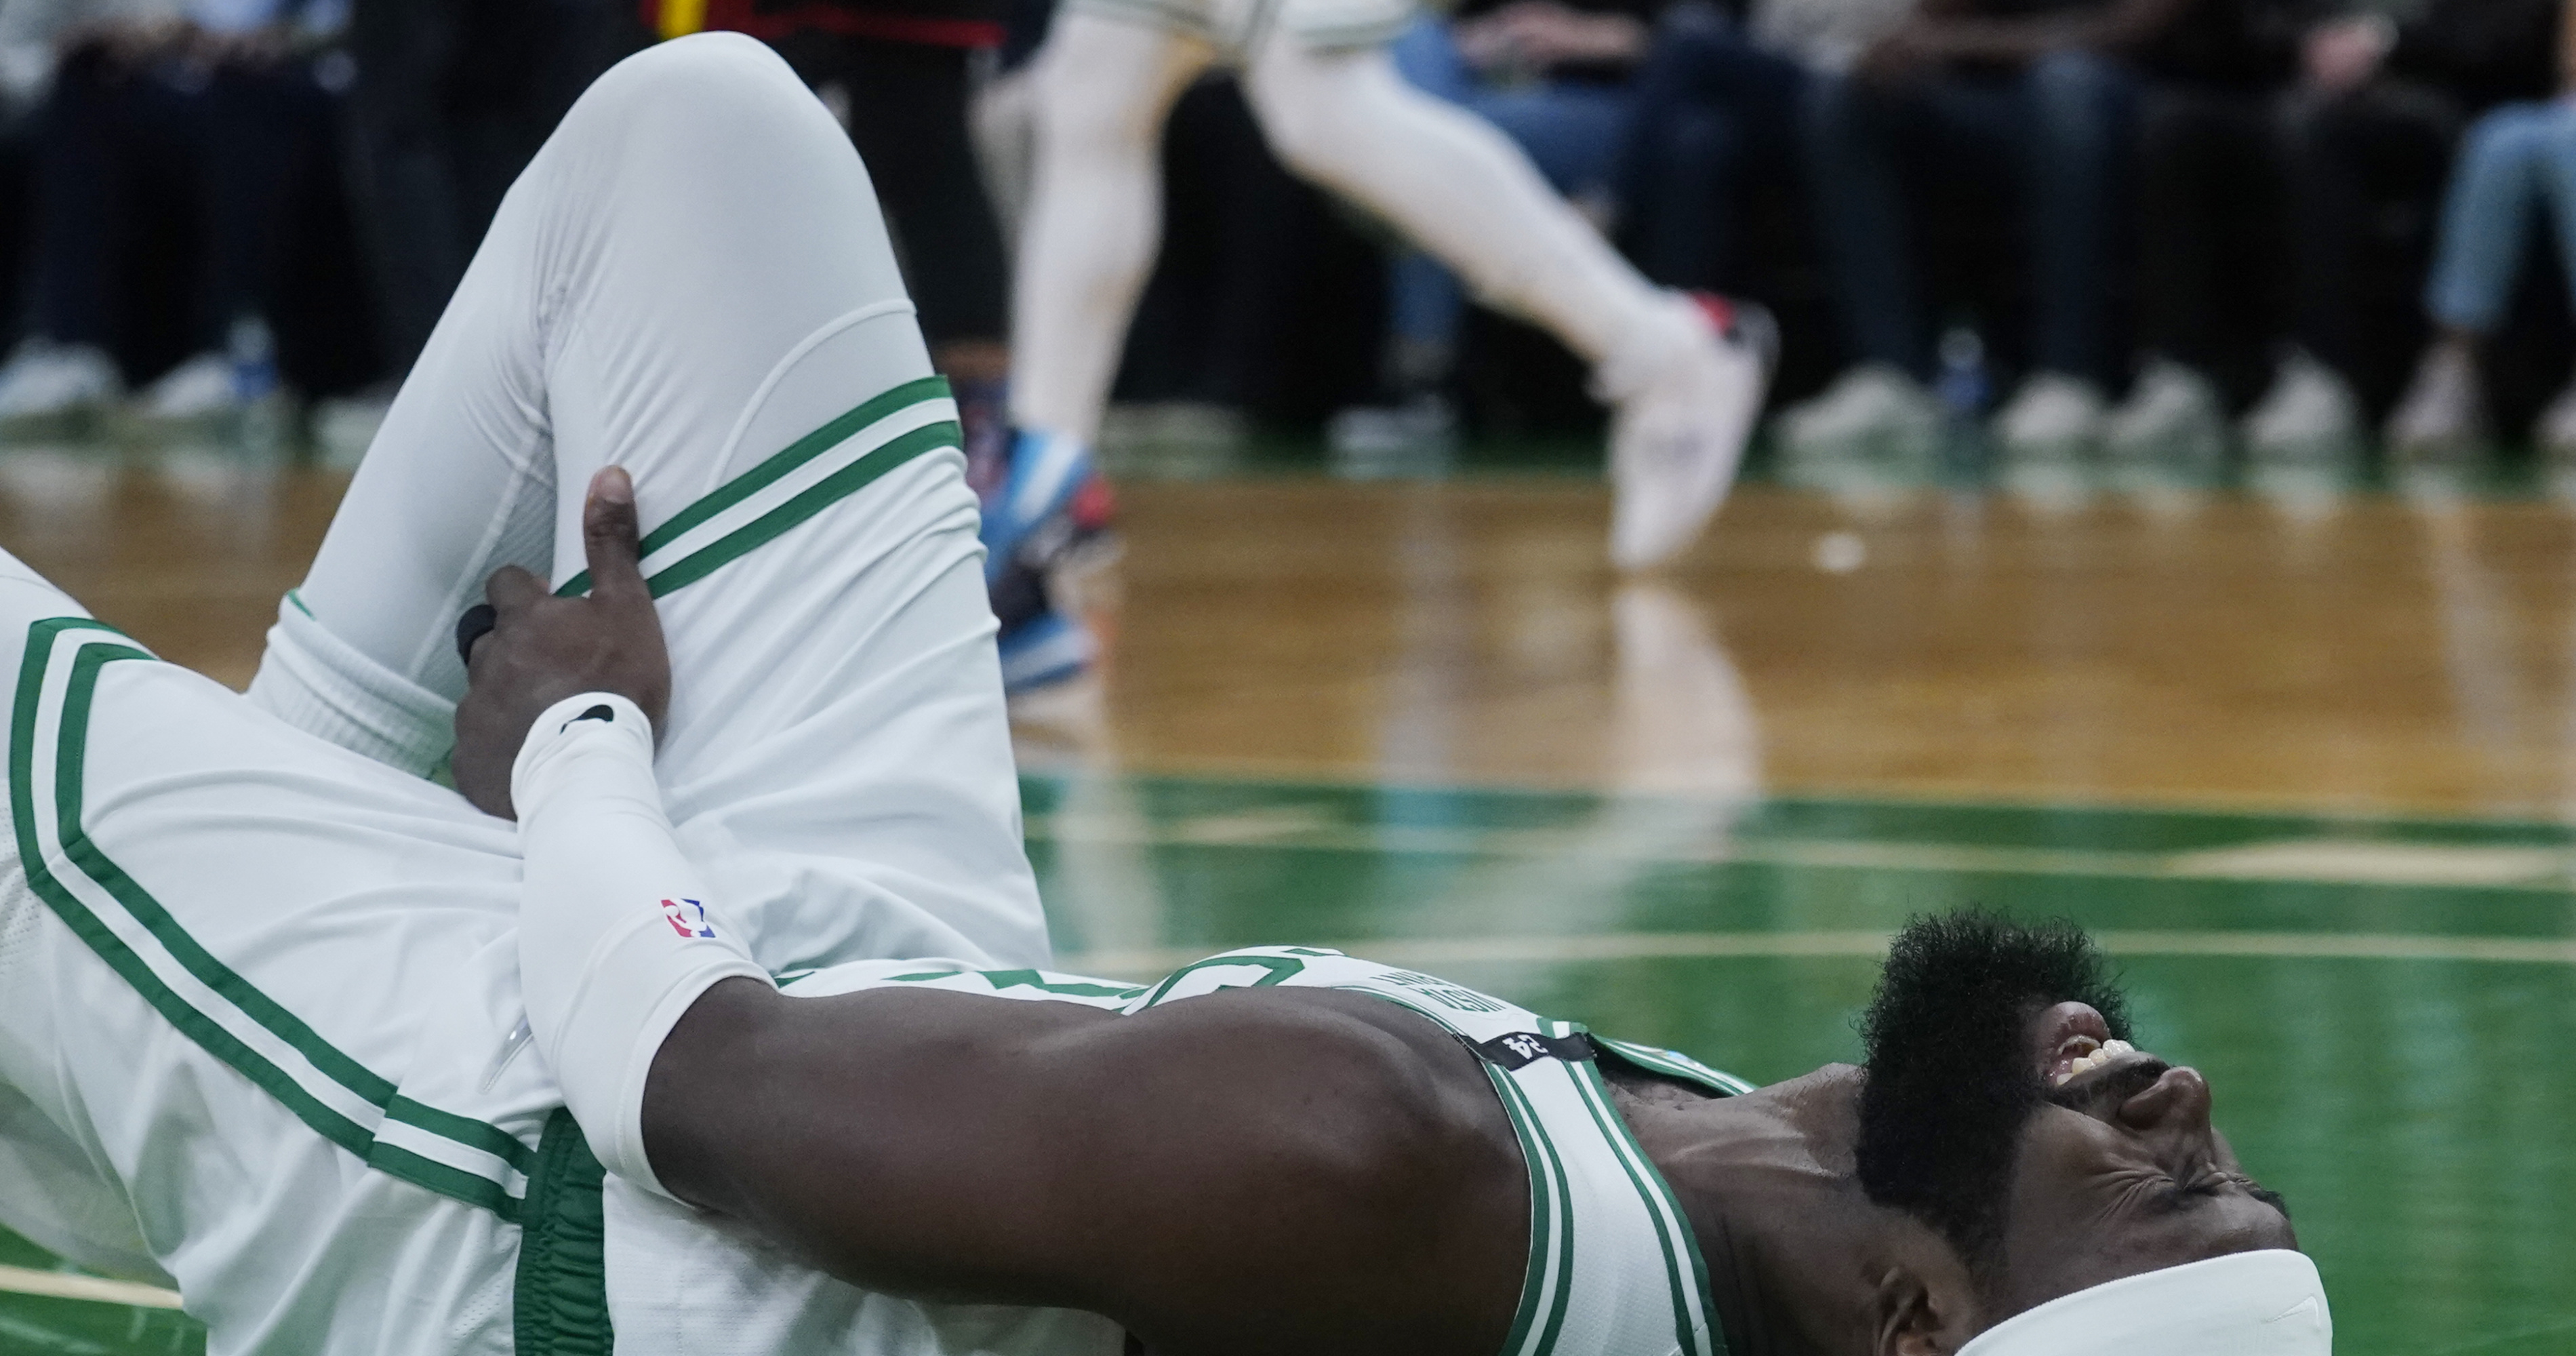 Jaylen Brown Ankle Injury Unlikely to Be LongTerm Issue, Celtics' Brad